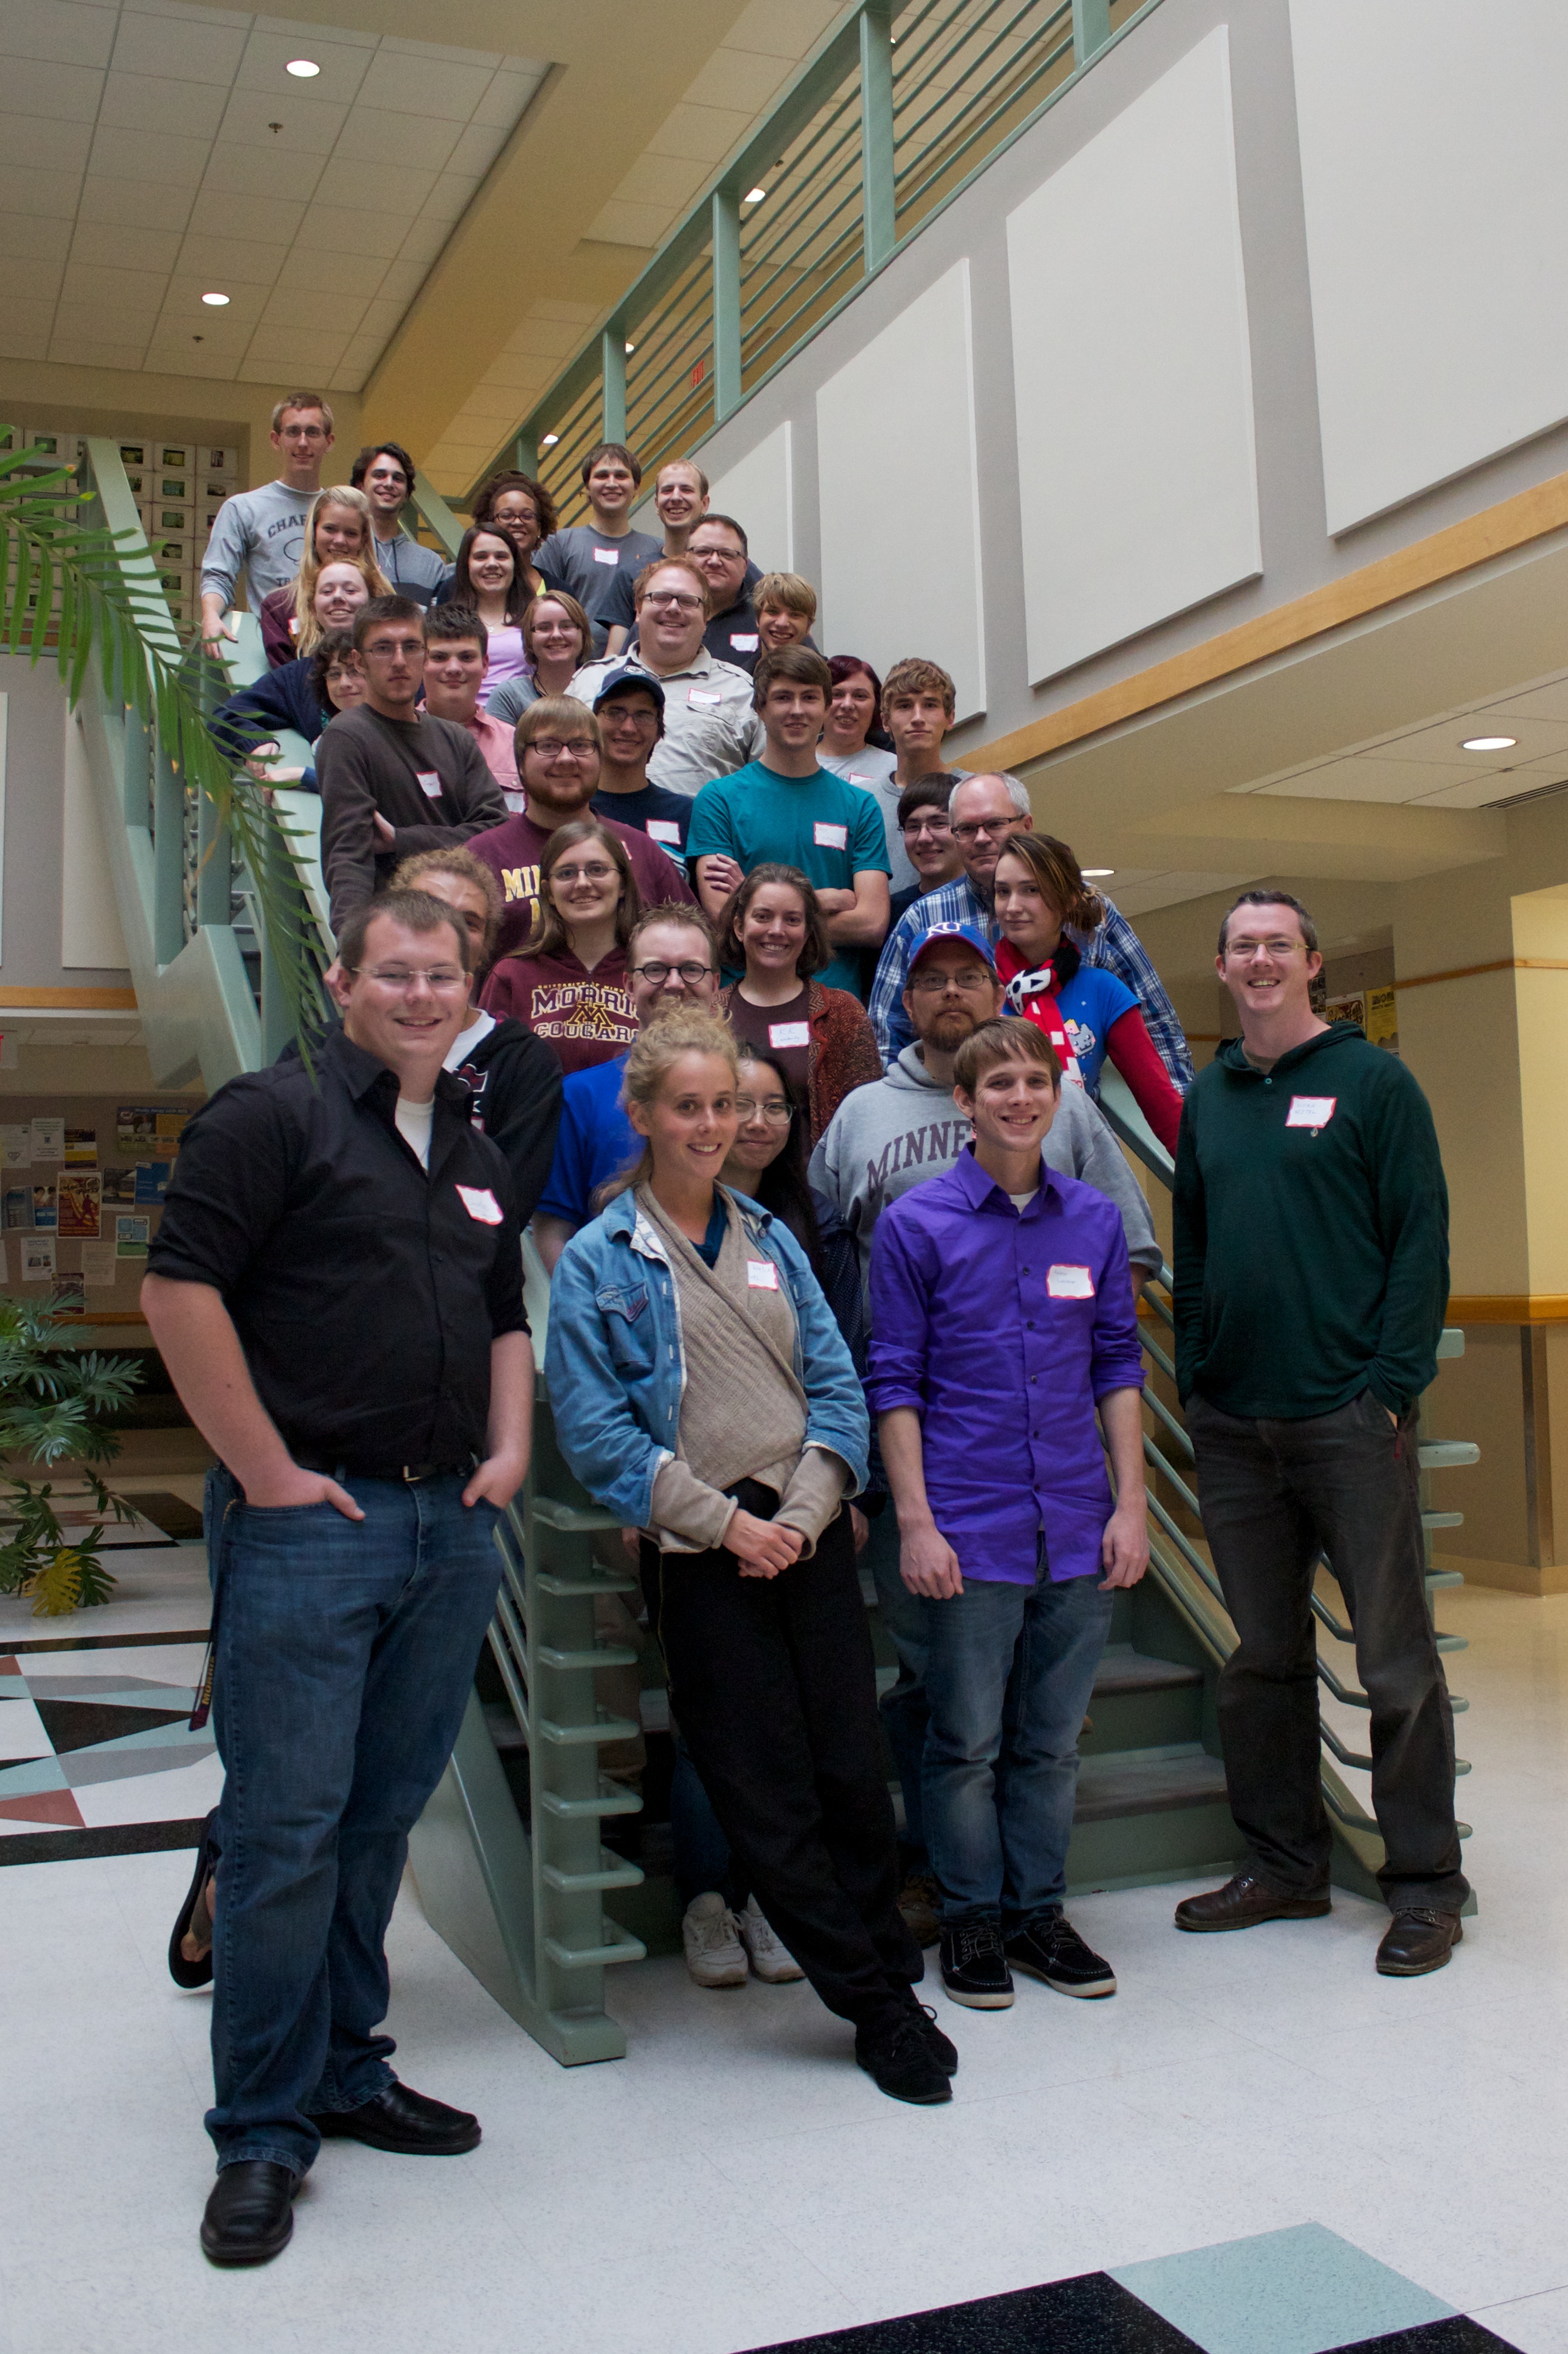 An Open Source Experience with Students from the University of Minnesota, Morris